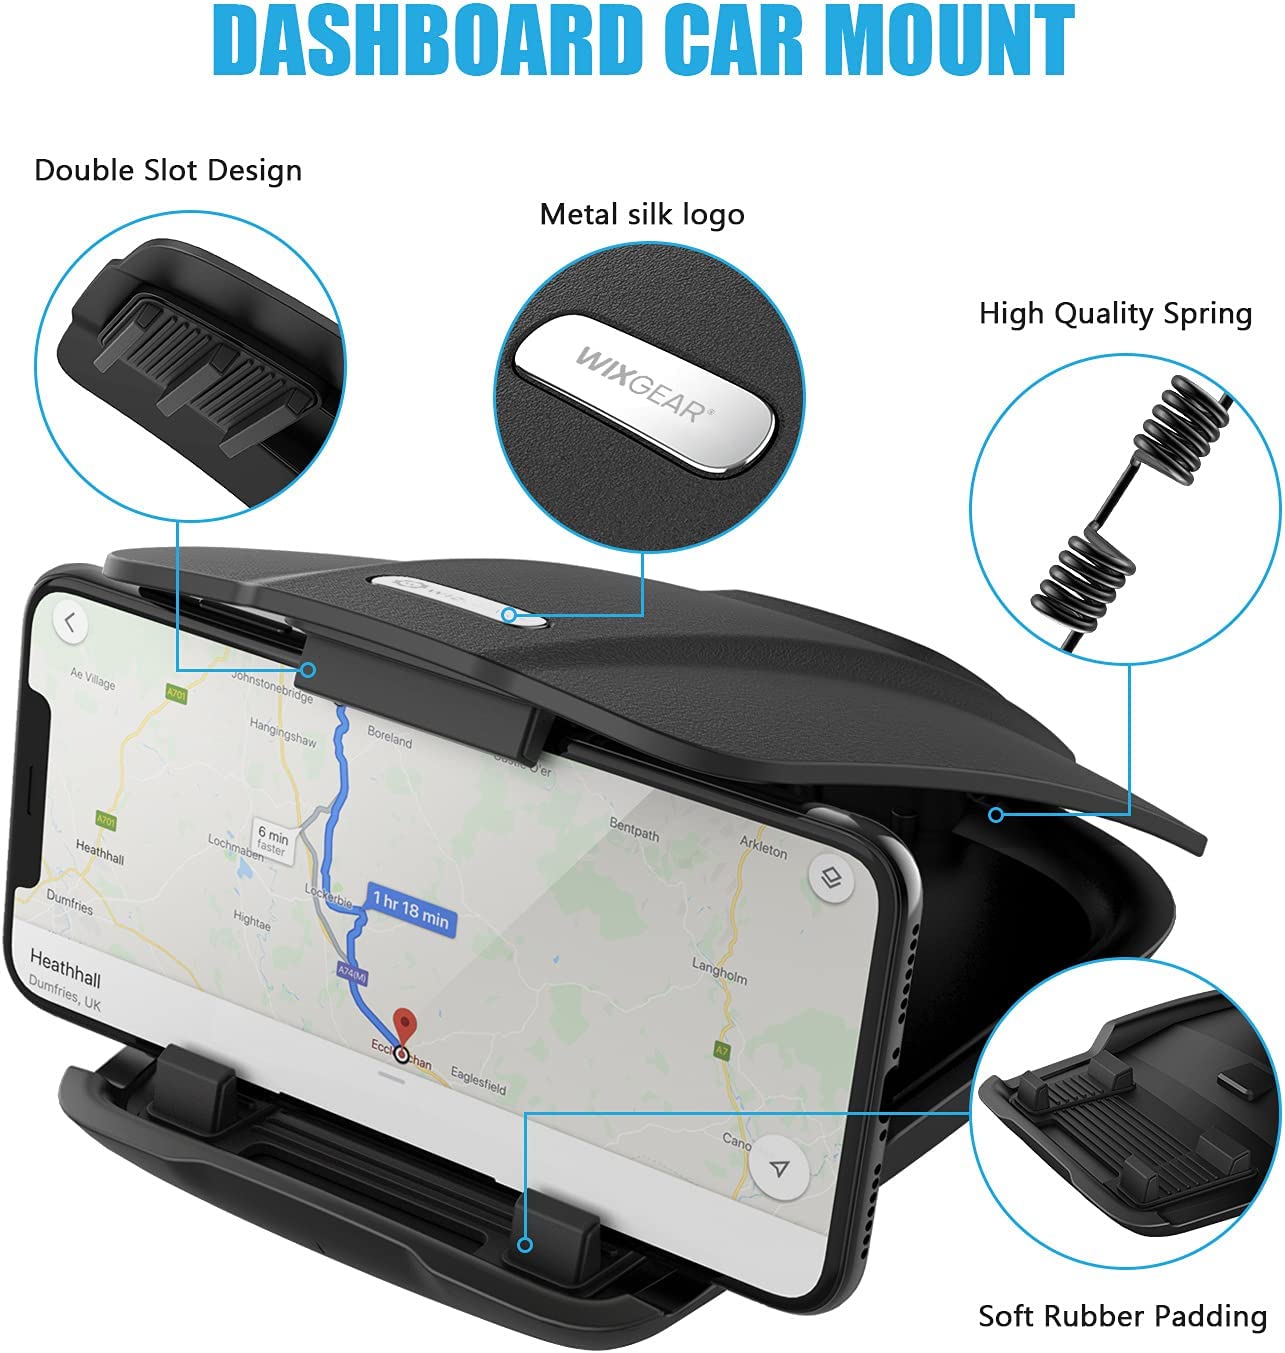 WixGear Dashboard Cell Phone Holder, Dash Mount Cell Phone Holder for Smartphones